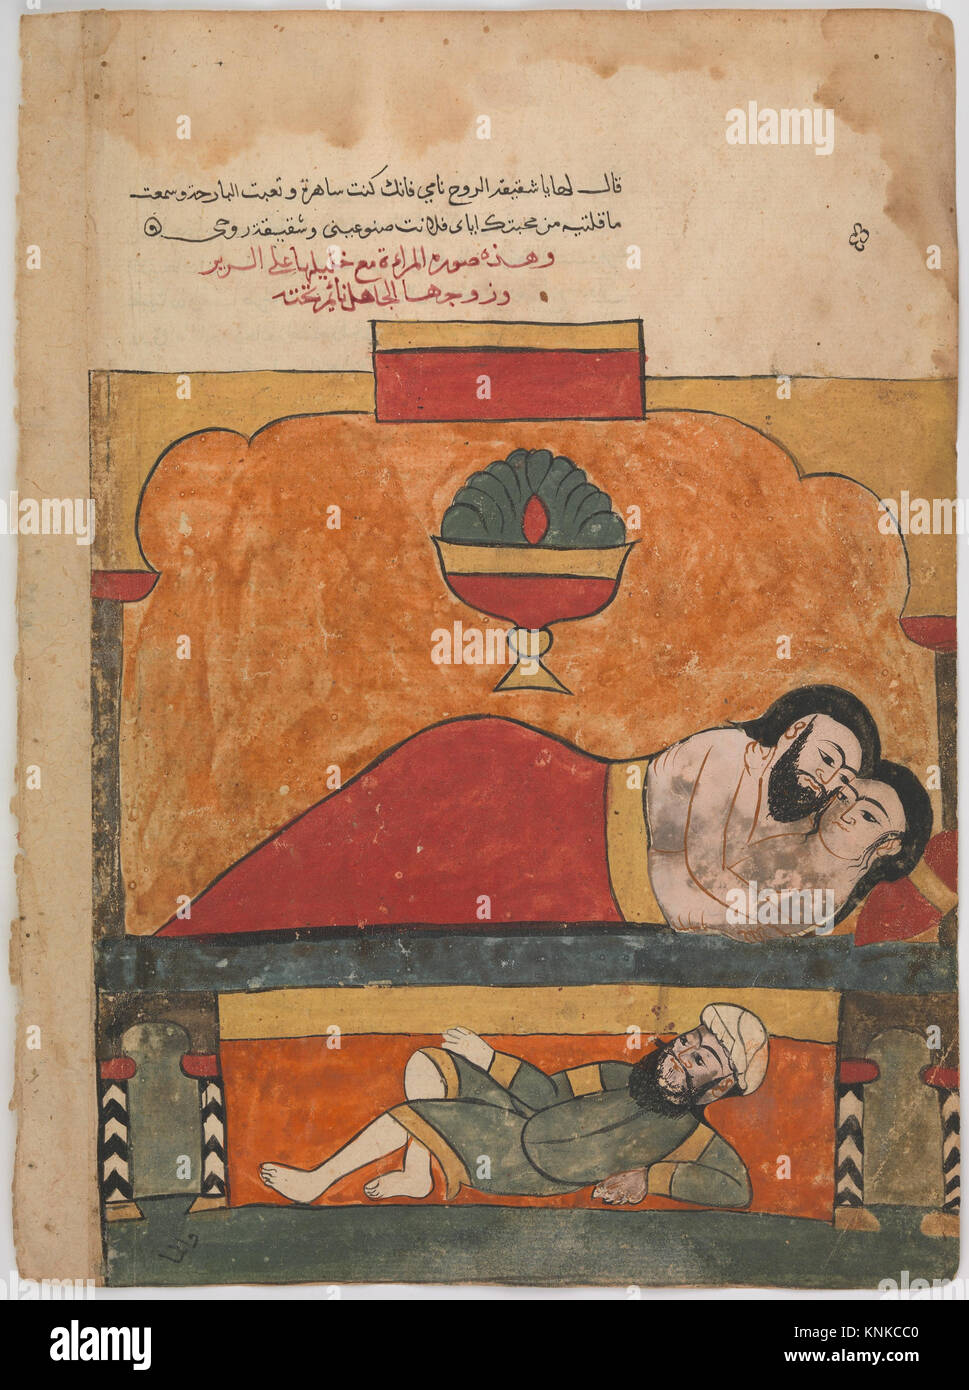 "The Cuckold Carpenter Under the Bed of his Wife and her Lover", Folio from a Kalila wa Dimna, second quarter 16th century, Attributed to India, Gujarat, probably based on an Egyptian original, Medium: Opaque watercolour and ink on paper Stock Photo